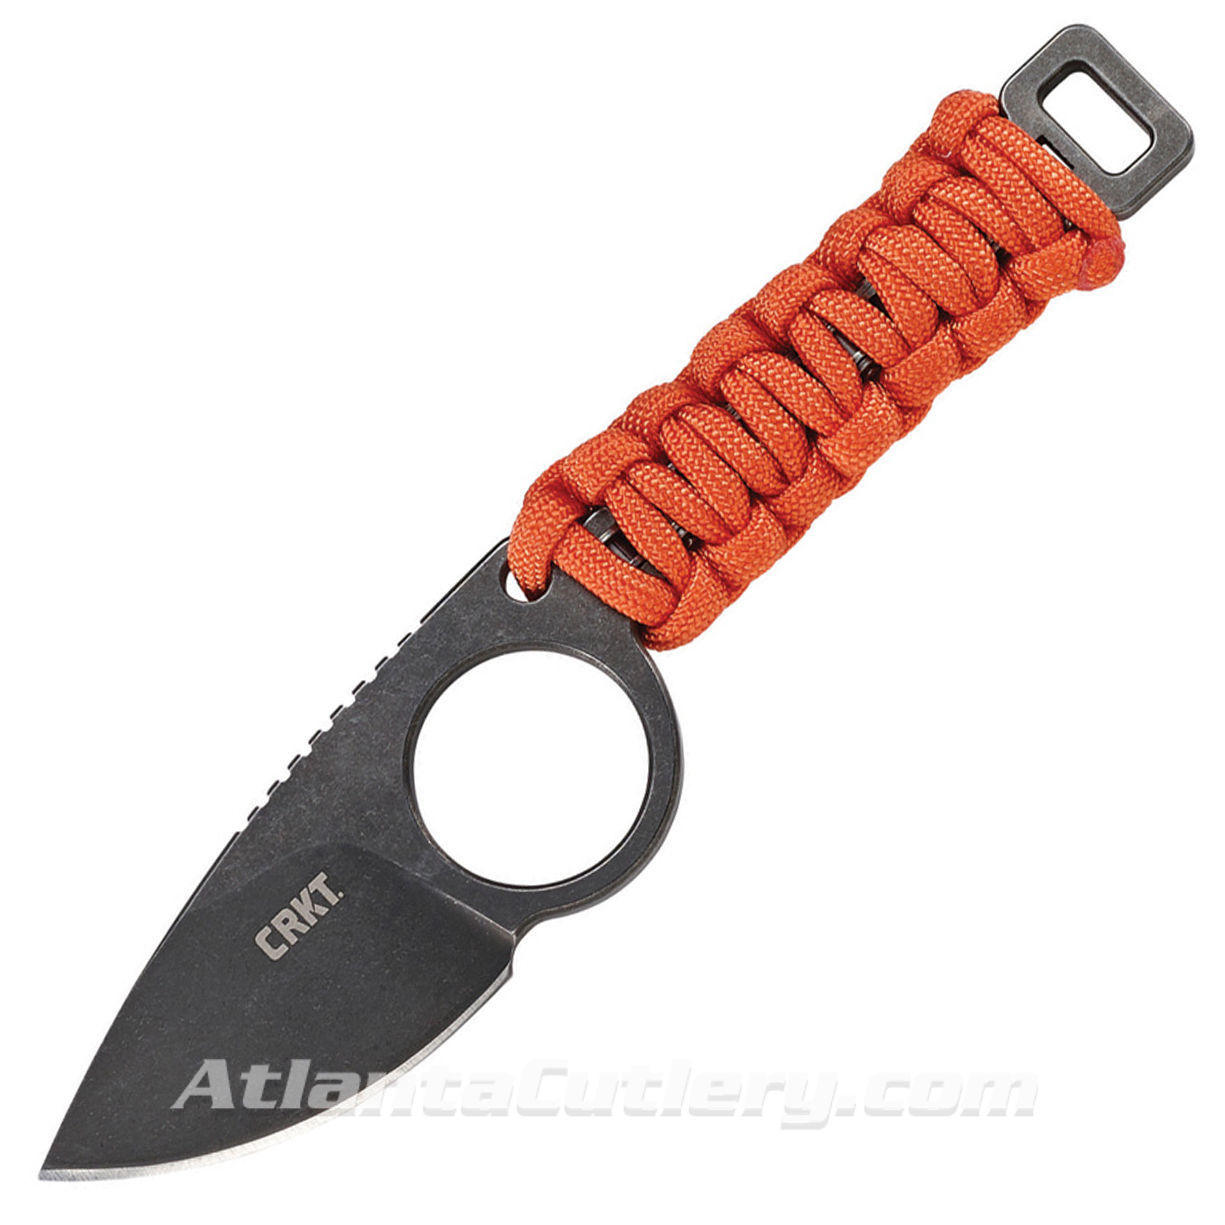 CRKT Tailbone Fixed Blade neck knife has drop point blade, flexible paracord-wrapped handle and injection-molded sheath